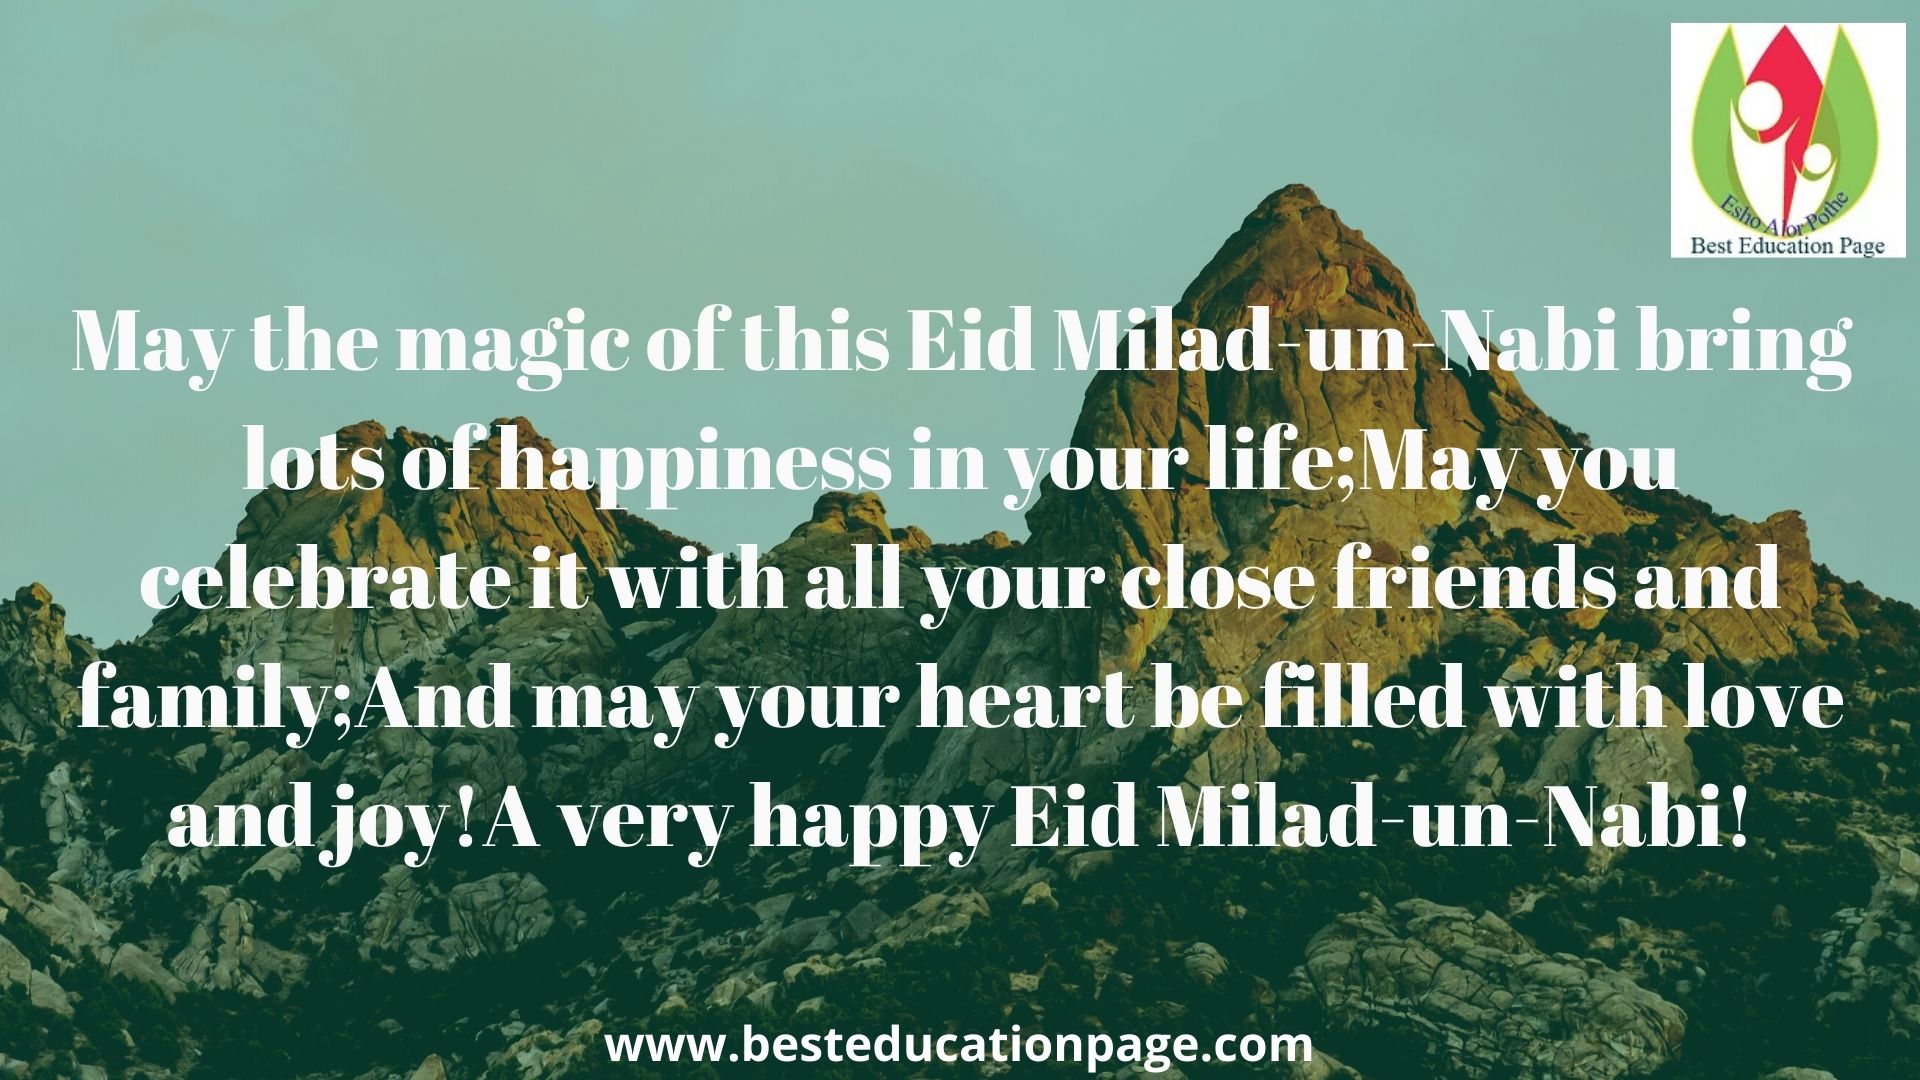 May the magic of this Eid Milad-un-Nabi bring lots of happiness in your life; May you celebrate it with all your close friends and family; And may your heart be filled with love and joy! A very happy Eid Milad-un-Nabi!